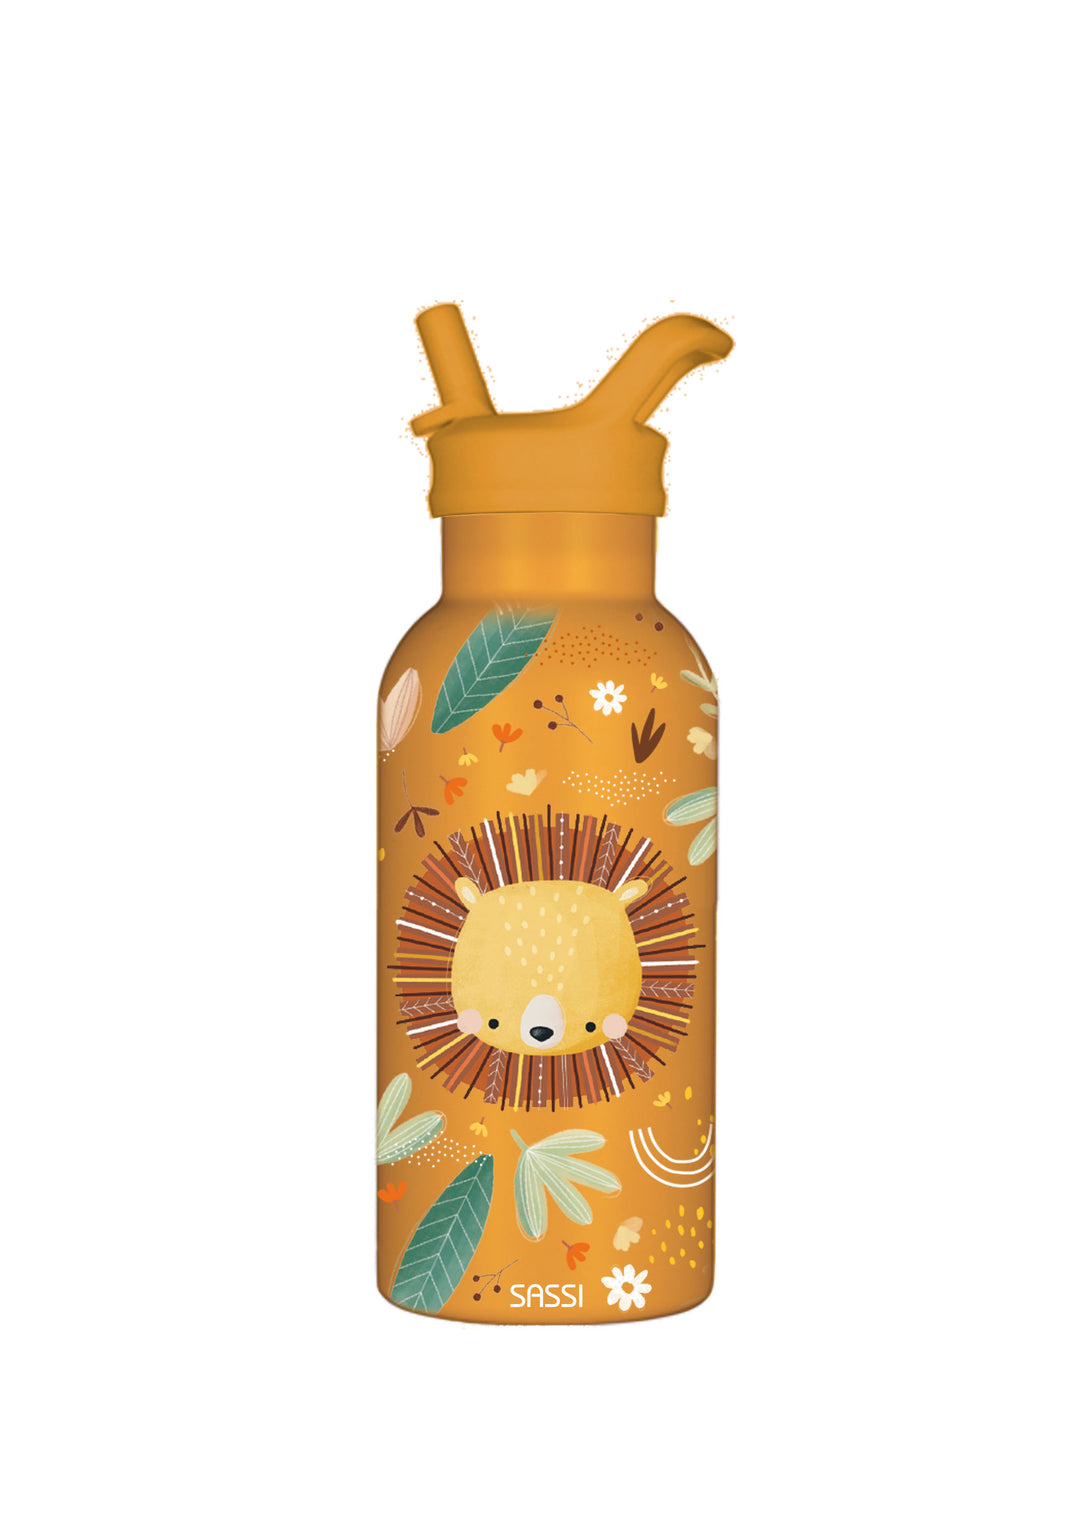 Sassi Vacuum Insulated Stainless Steel Drink Bottle 350 ml - Chompy The Lion